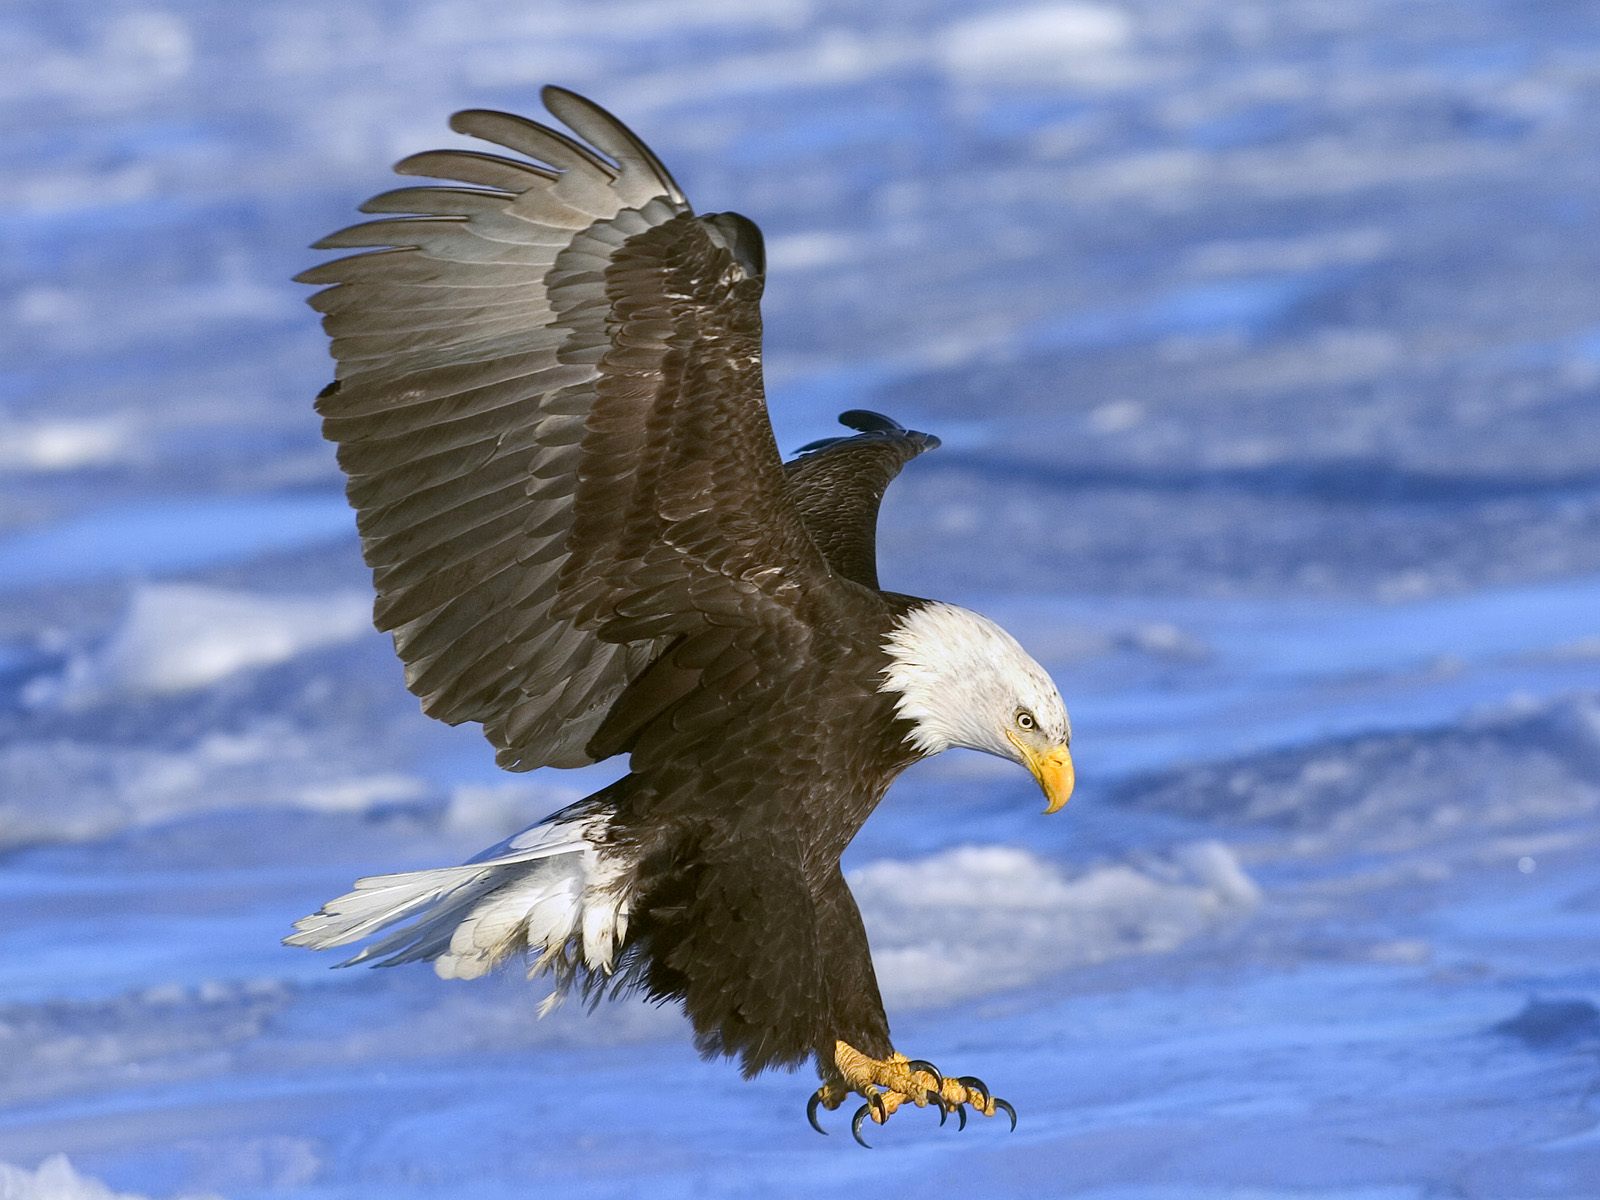 mobile desktop background hd a picture of a golden eagle